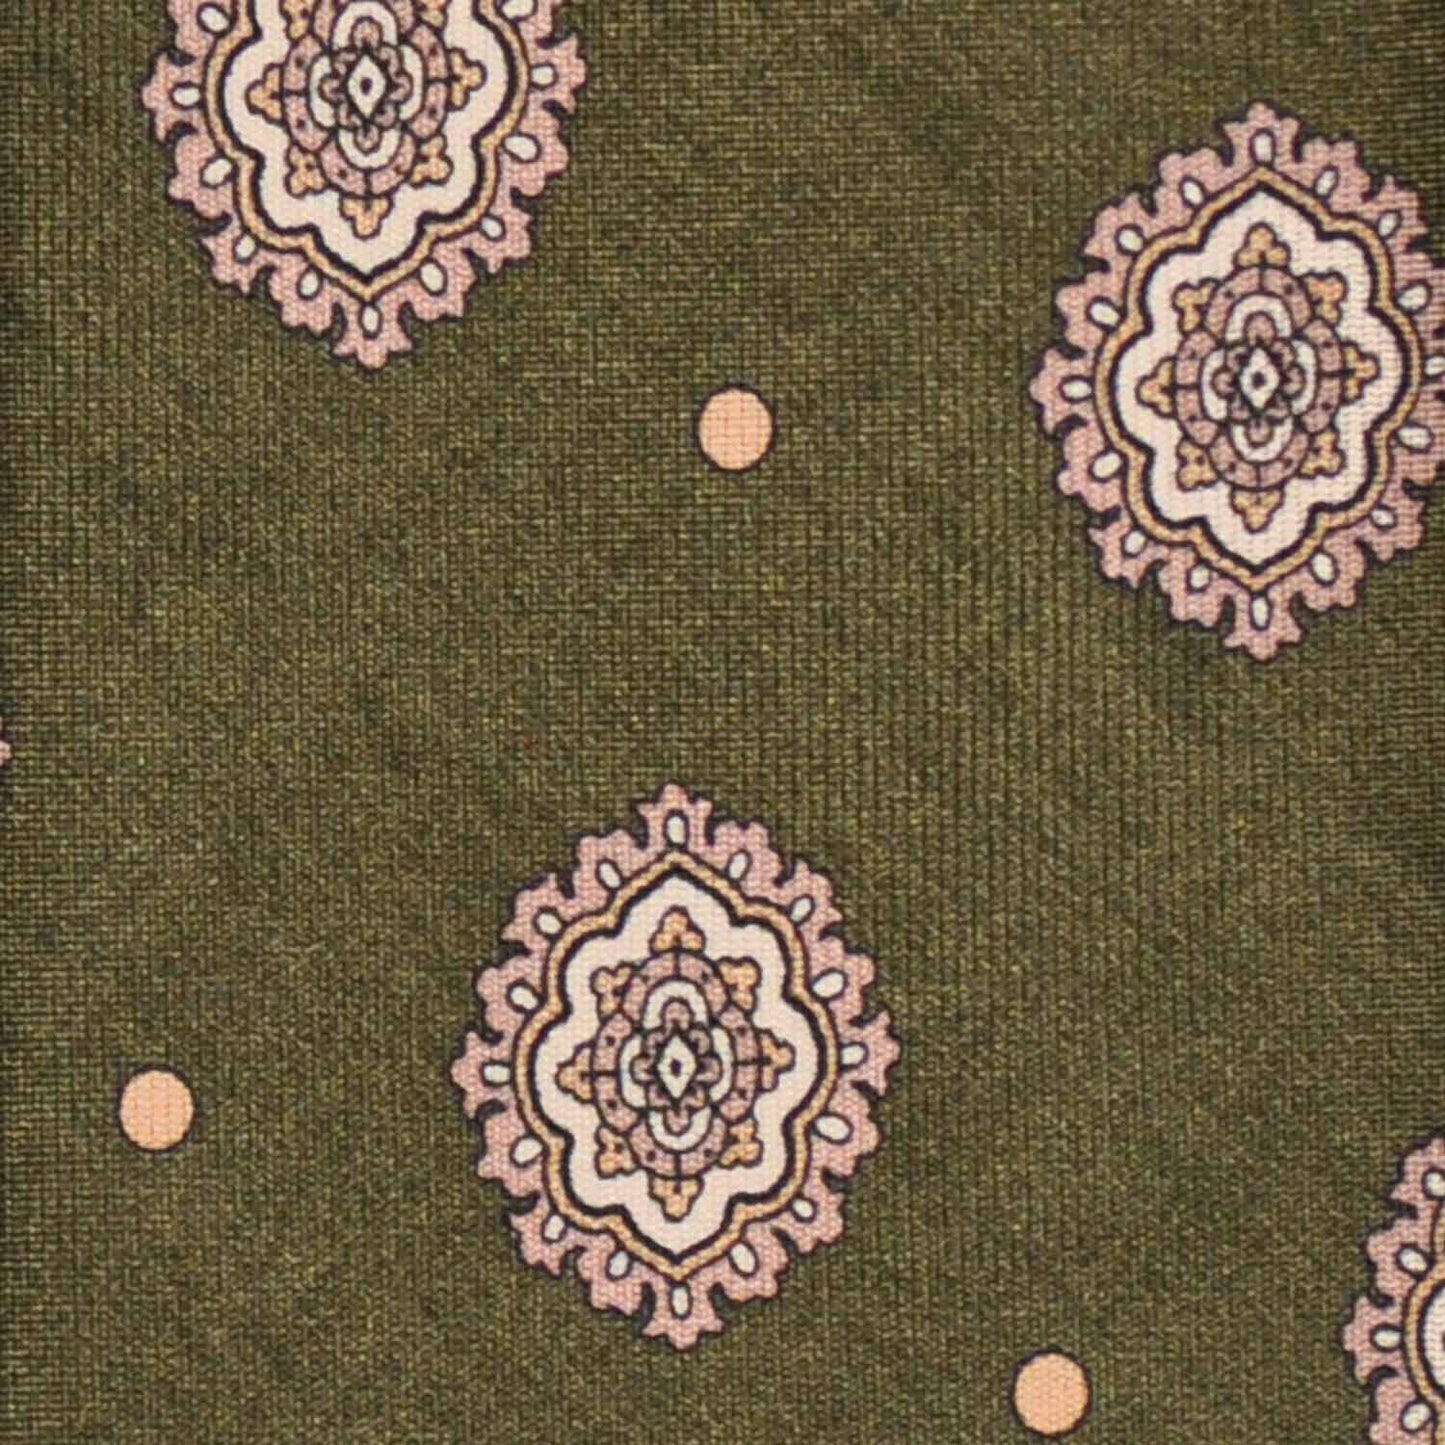 Load image into Gallery viewer, Vintage Medallions Army Green Silk Tie. Exclusive handmade satin silk tie, army green background with sand beige pois and vintage medallions pattern
